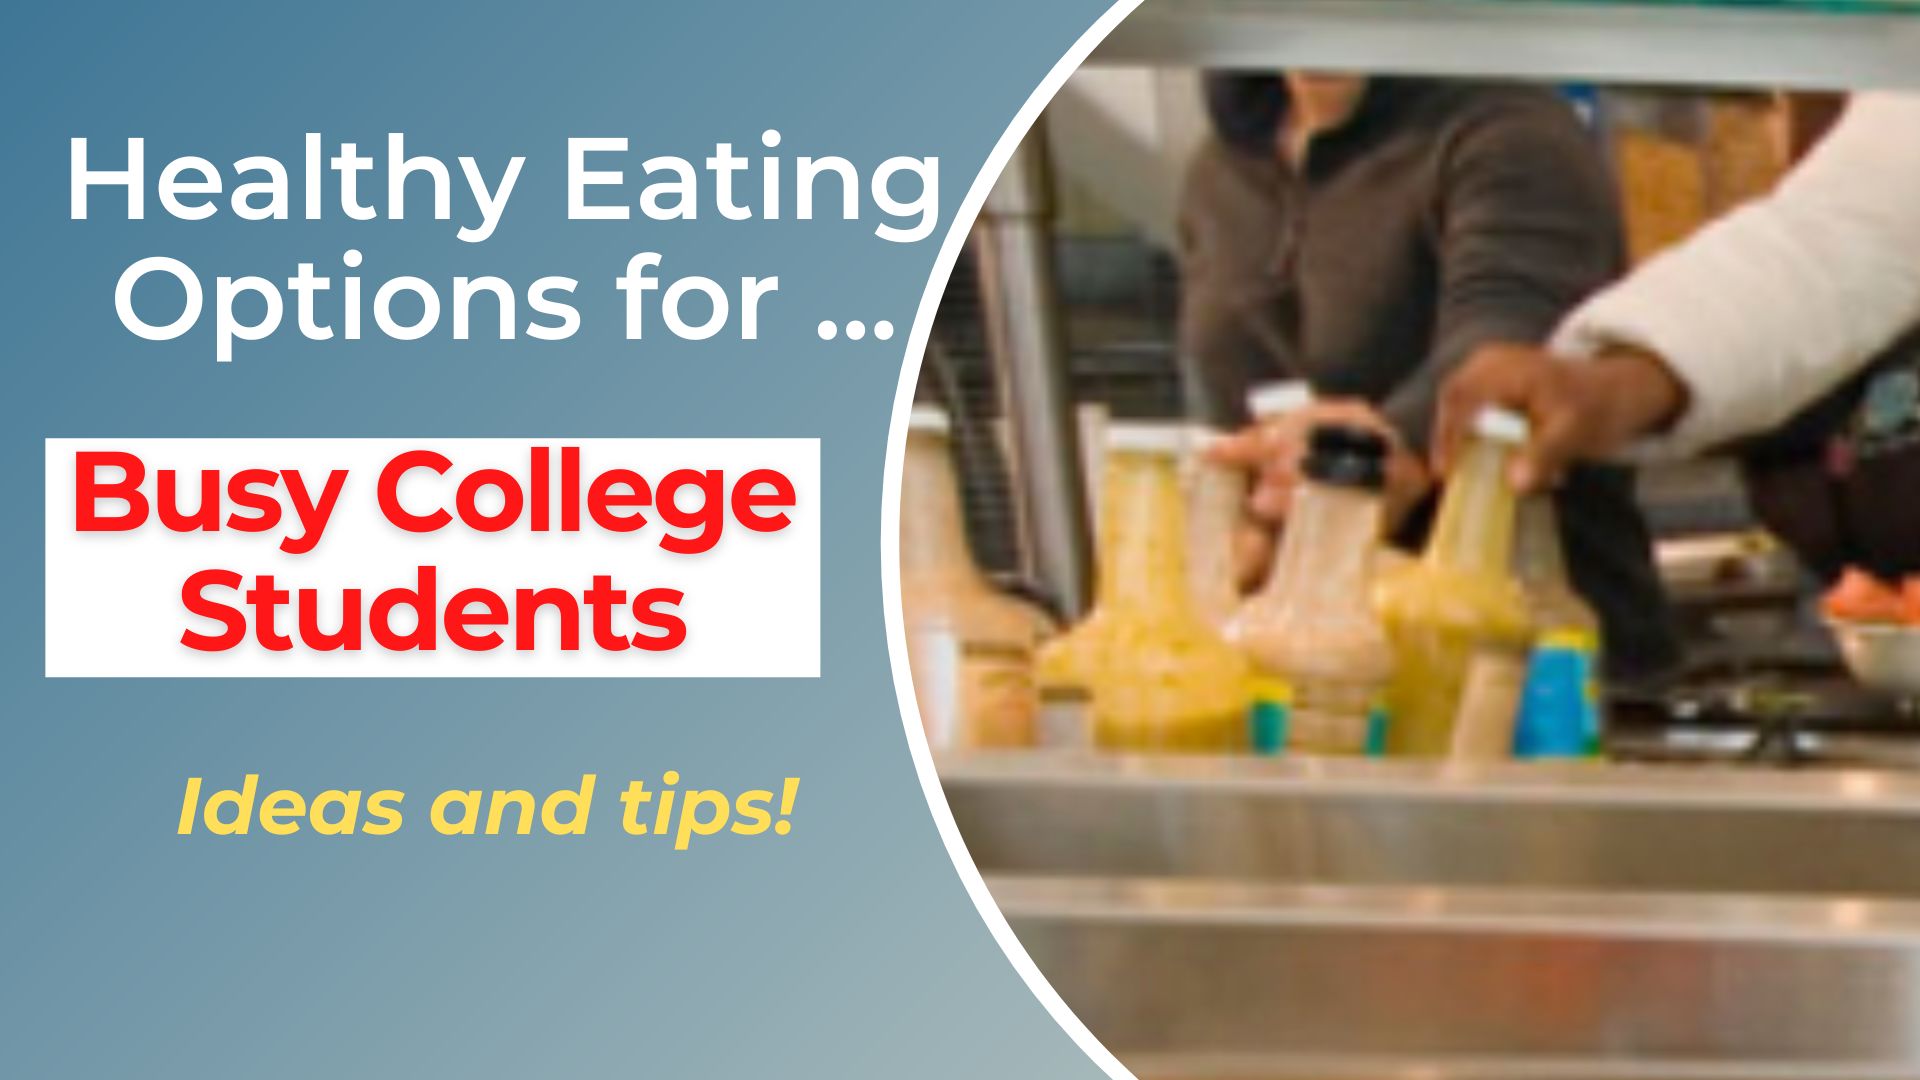 Healthy Eating Options for Busy College Students